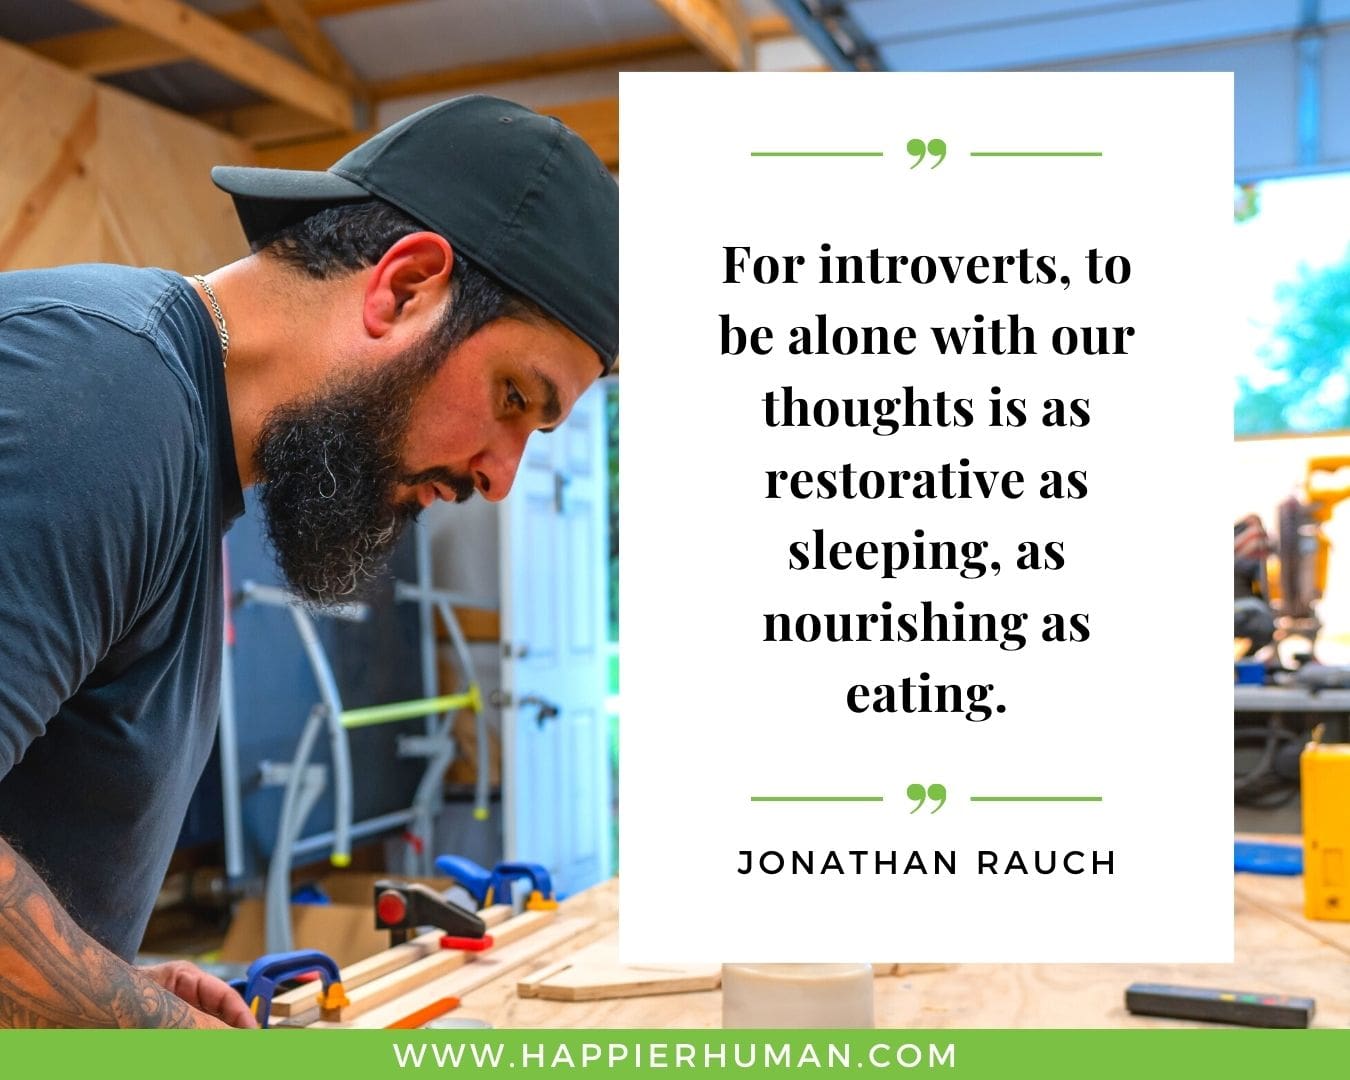 Introvert Quotes - “For introverts, to be alone with our thoughts is as restorative as sleeping, as nourishing as eating.” – Jonathan Rauch